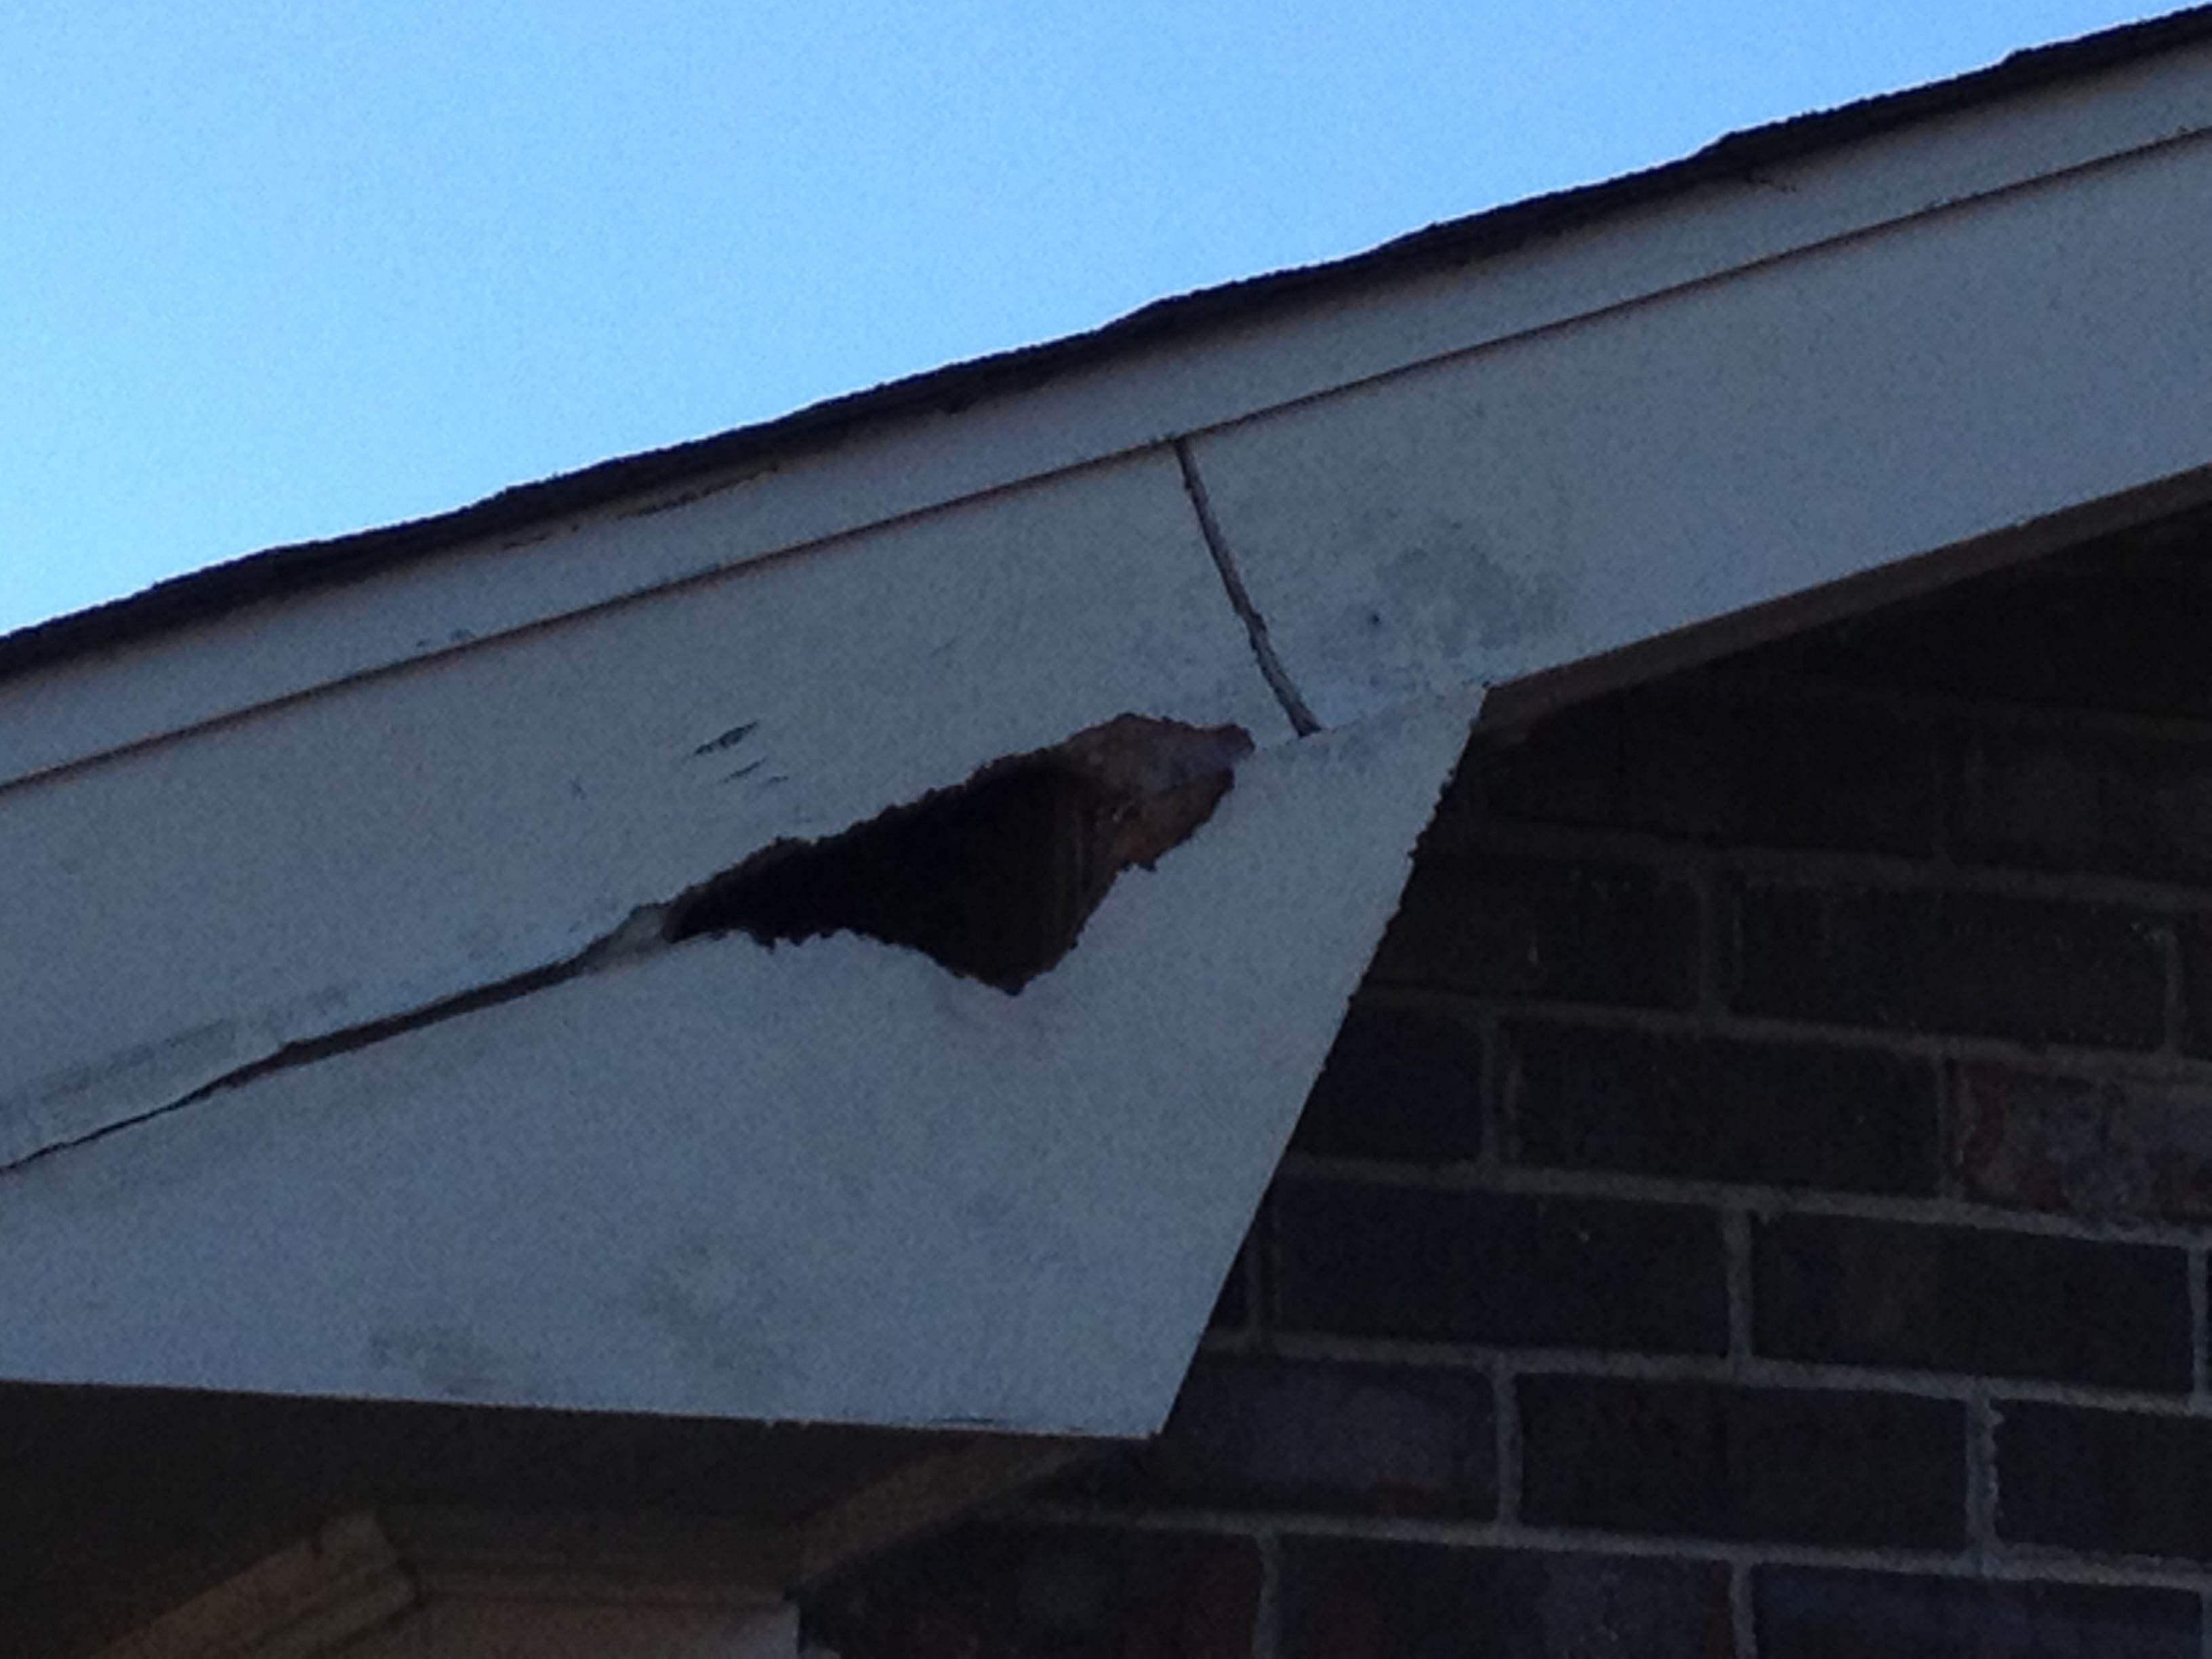 A sizable hole is shown where squirrels were able to chew a large hole in the roof trim of a home.